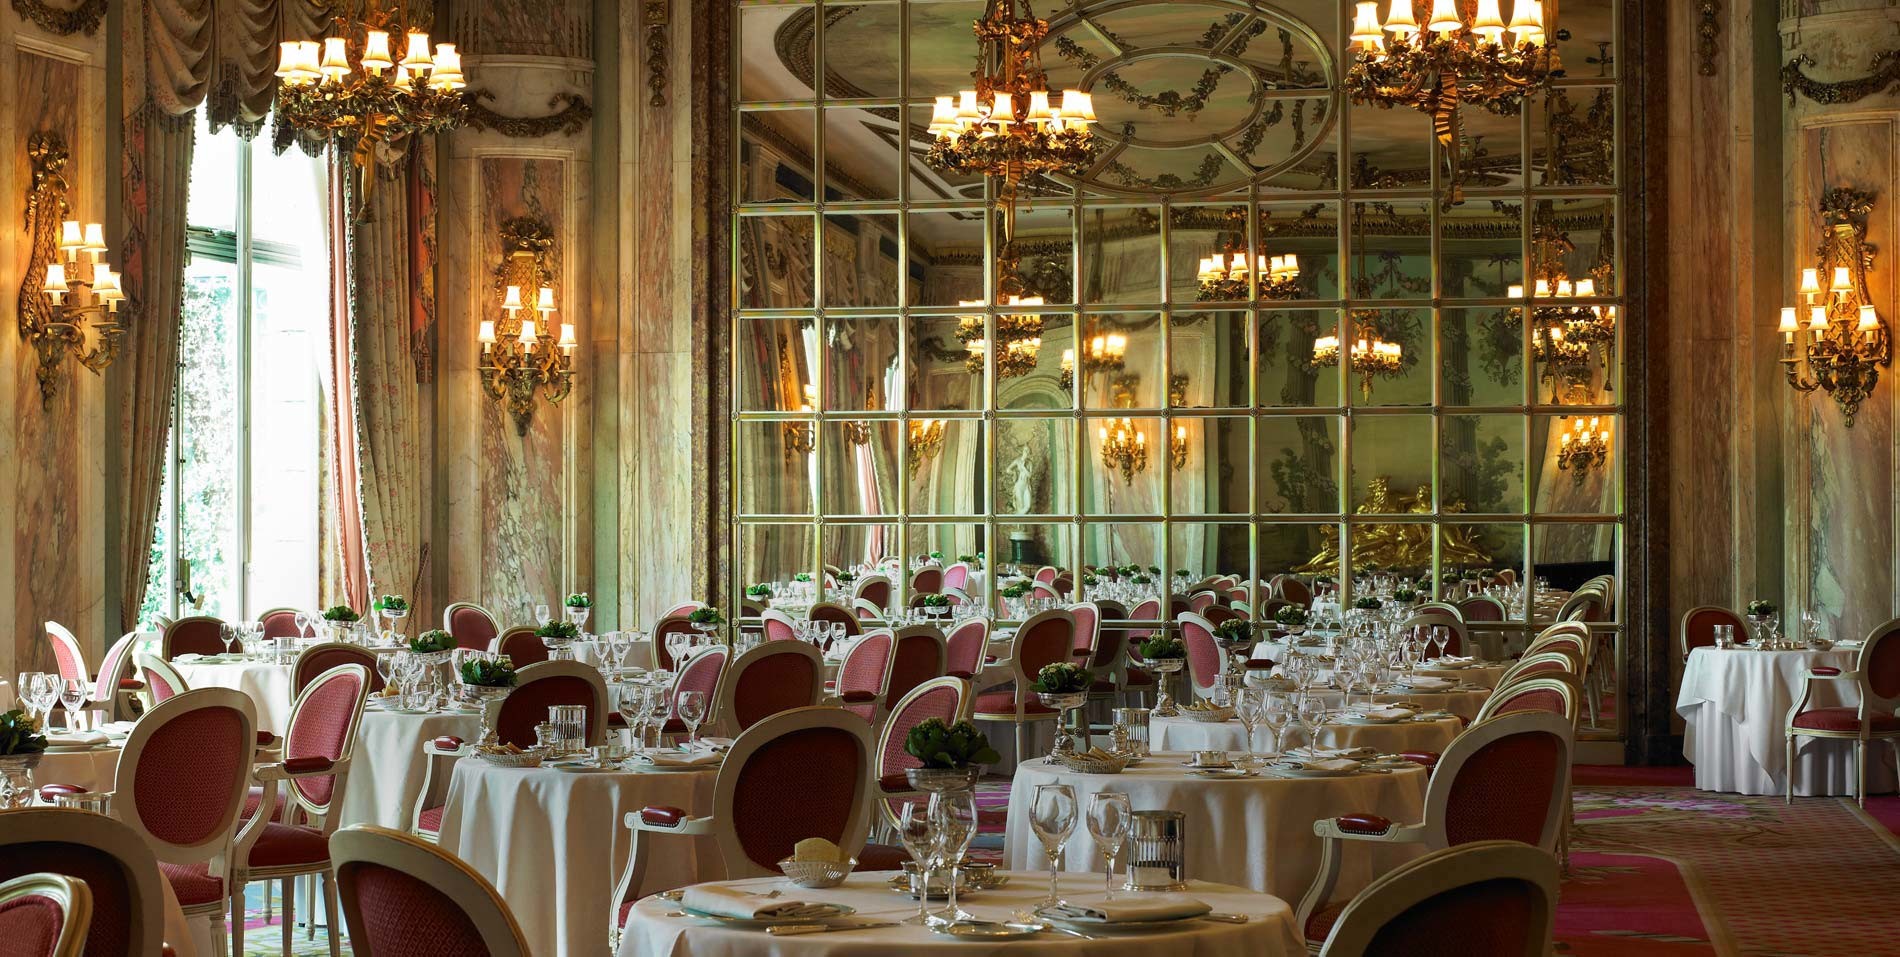 news-main-royal-academy-of-culinary-arts-annual-awards-of-excellence-2019-winners-presented-at-claridges.1563460340.jpg